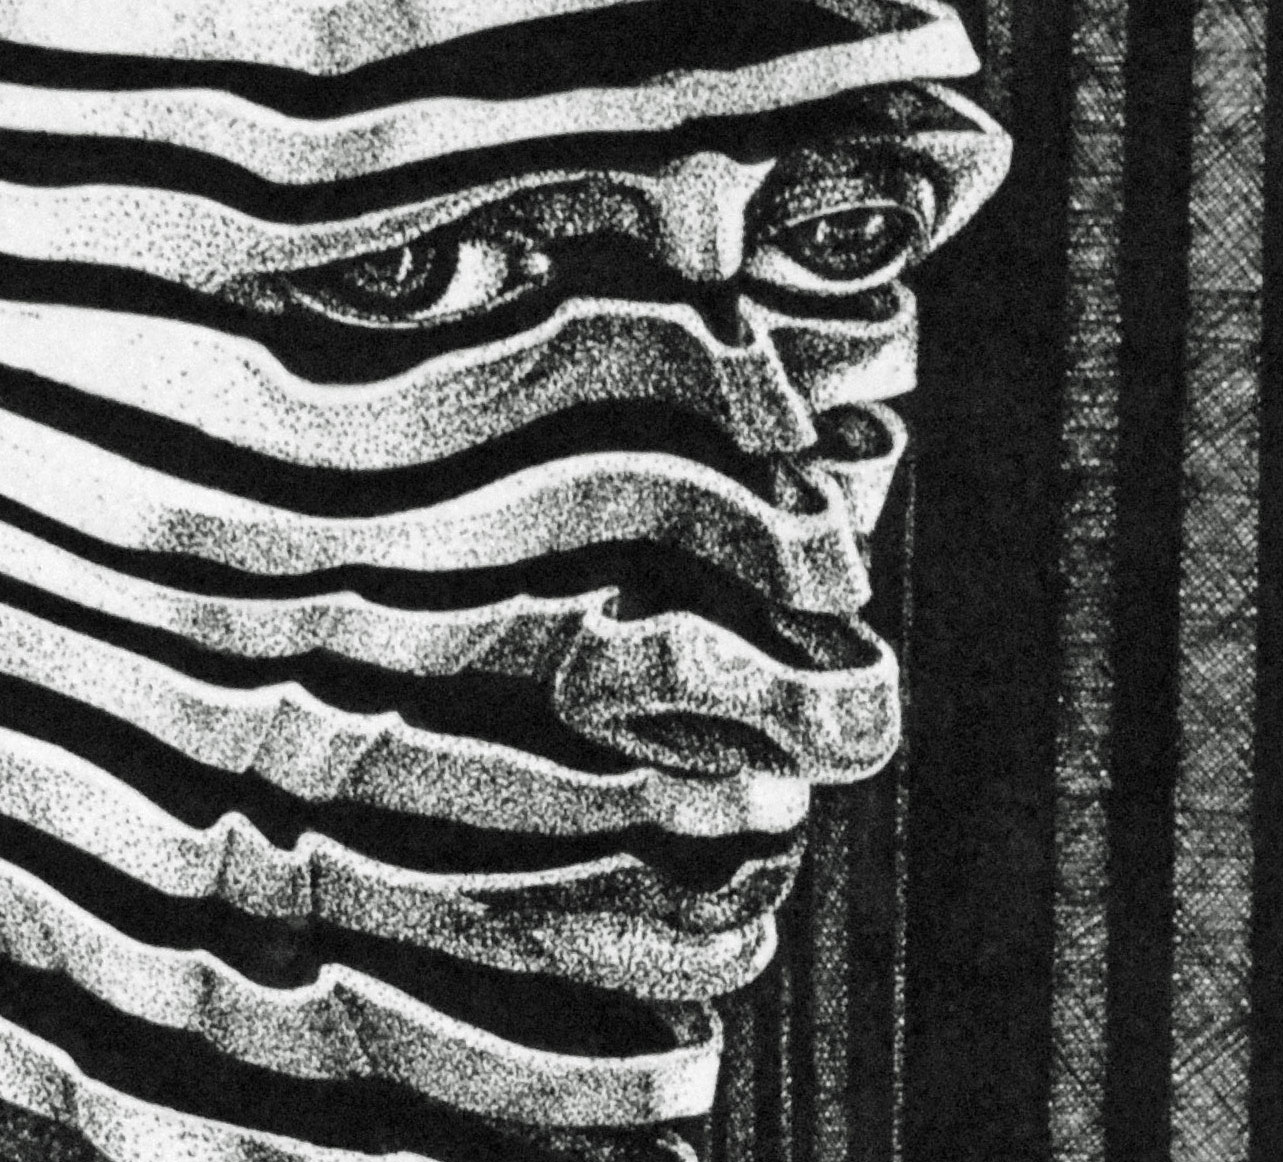 DIVIDED SELF, portrays a man made of horizontal strips of fabric